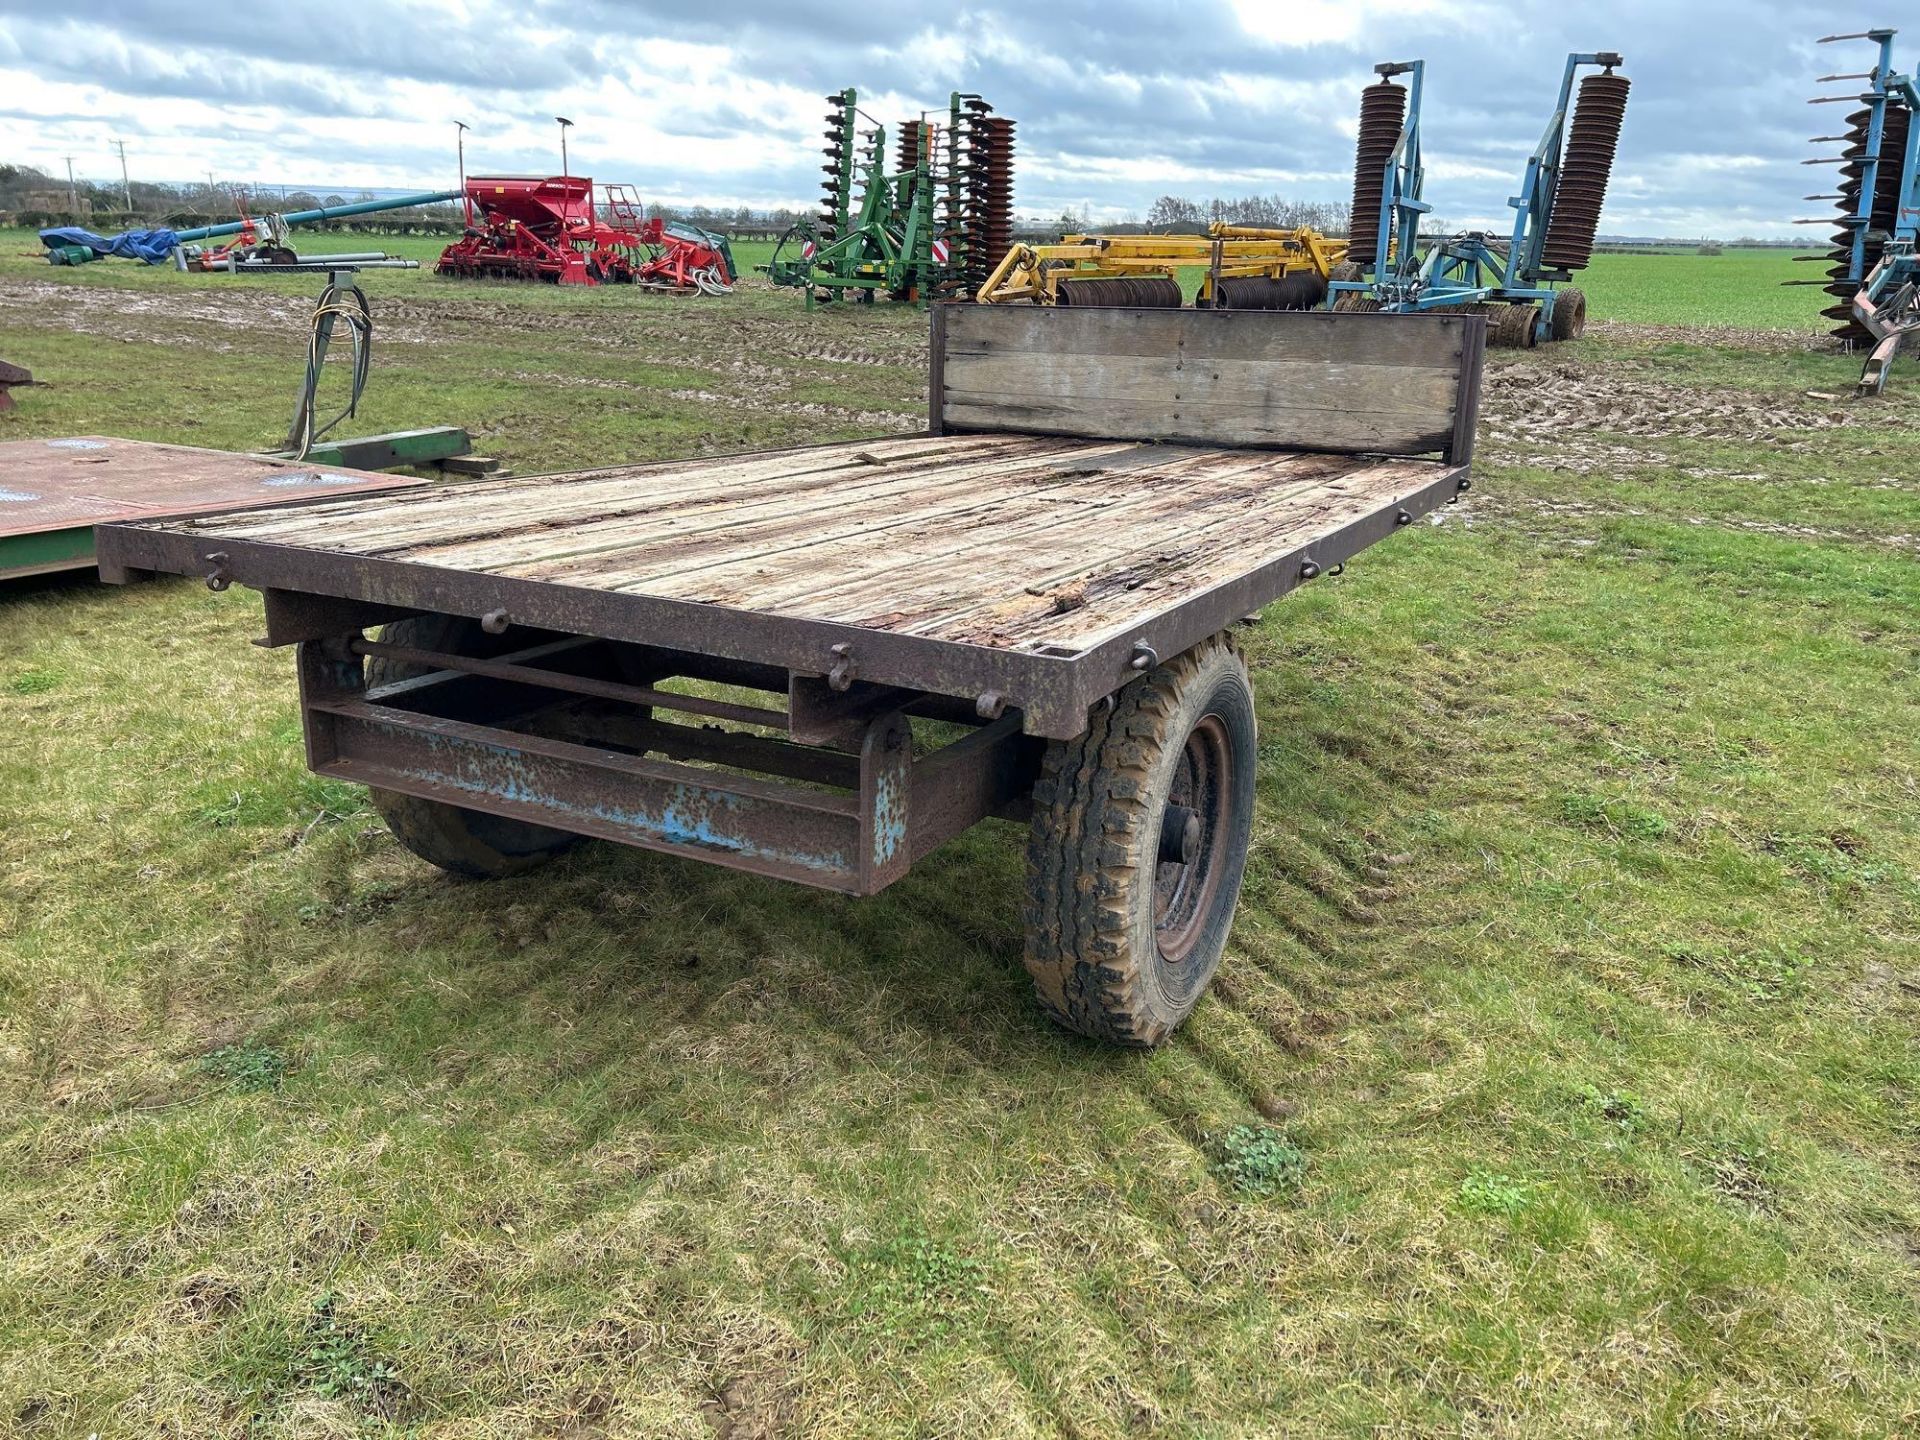 Single axle flat bed trailer with wooden floor - Image 3 of 6